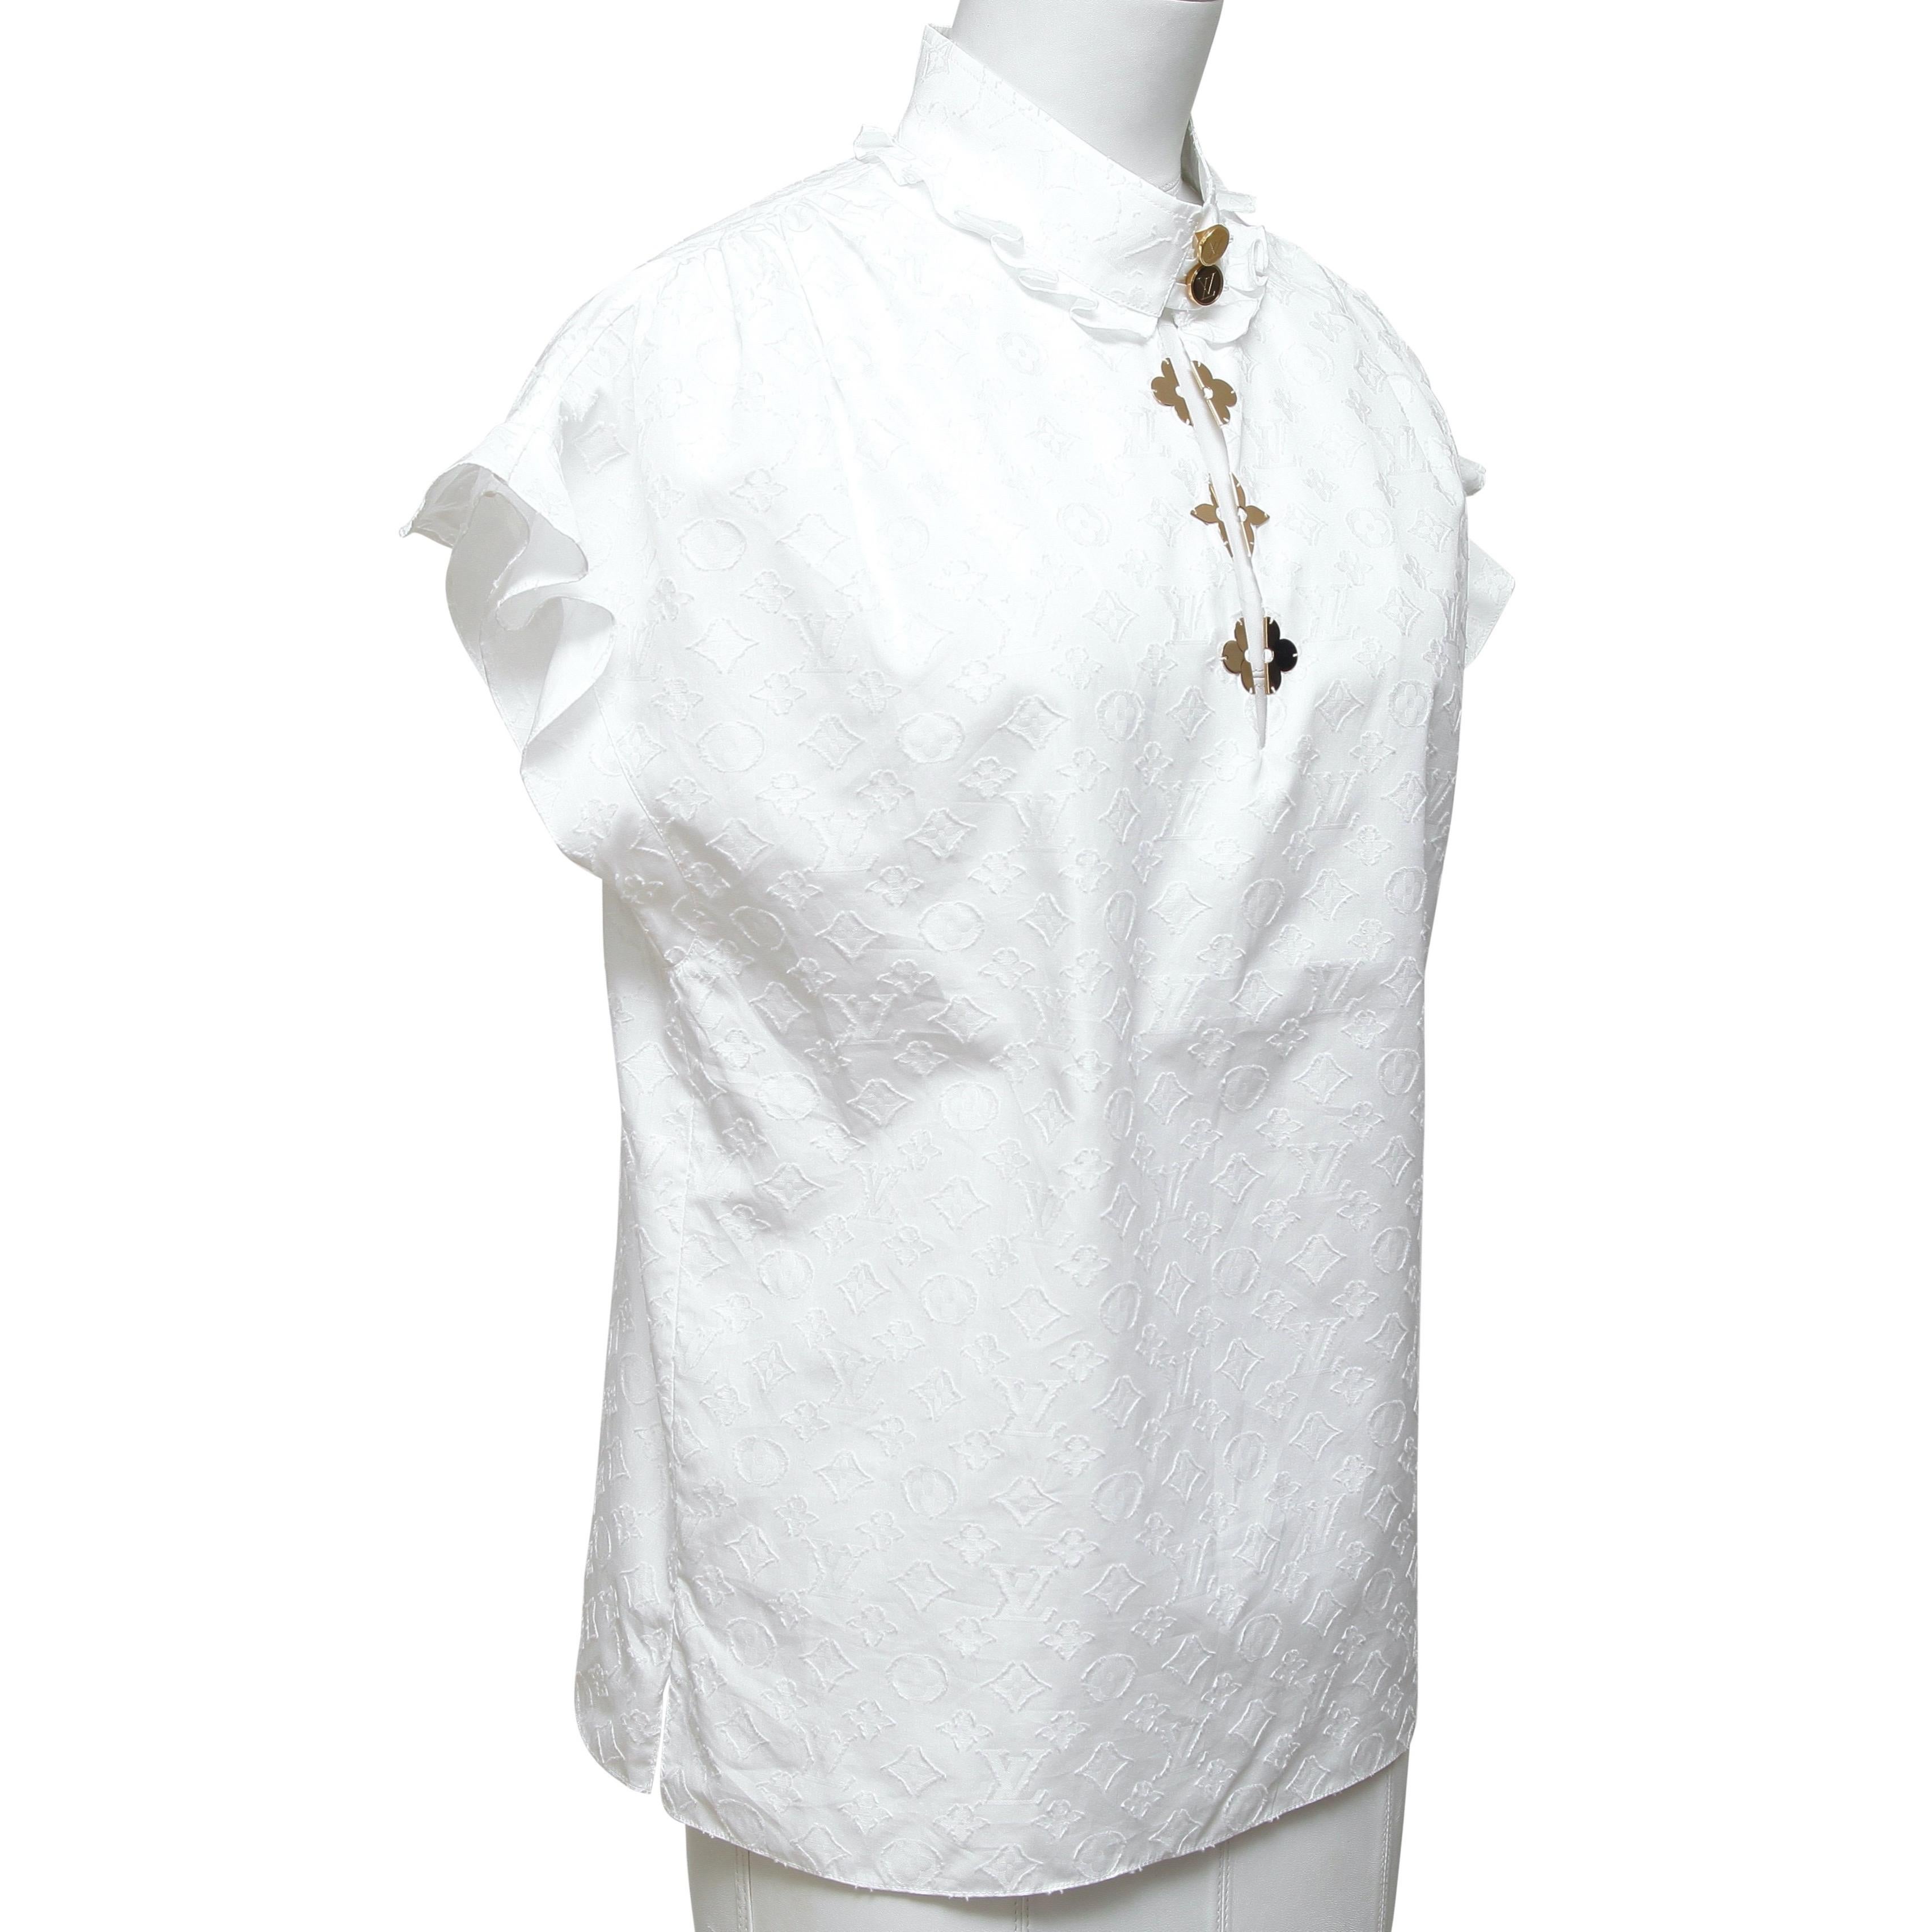 GUARANTEED AUTHENTIC LOUIS VUITTON WHITE MONOGRAM FRILL BLOUSE

Retail excluding sales taxes $1,320

Design:
- White monogram poplin cotton print.
- Stand up collar, two button closure.
- Floral monogram floral embellishments at front.
- Frill